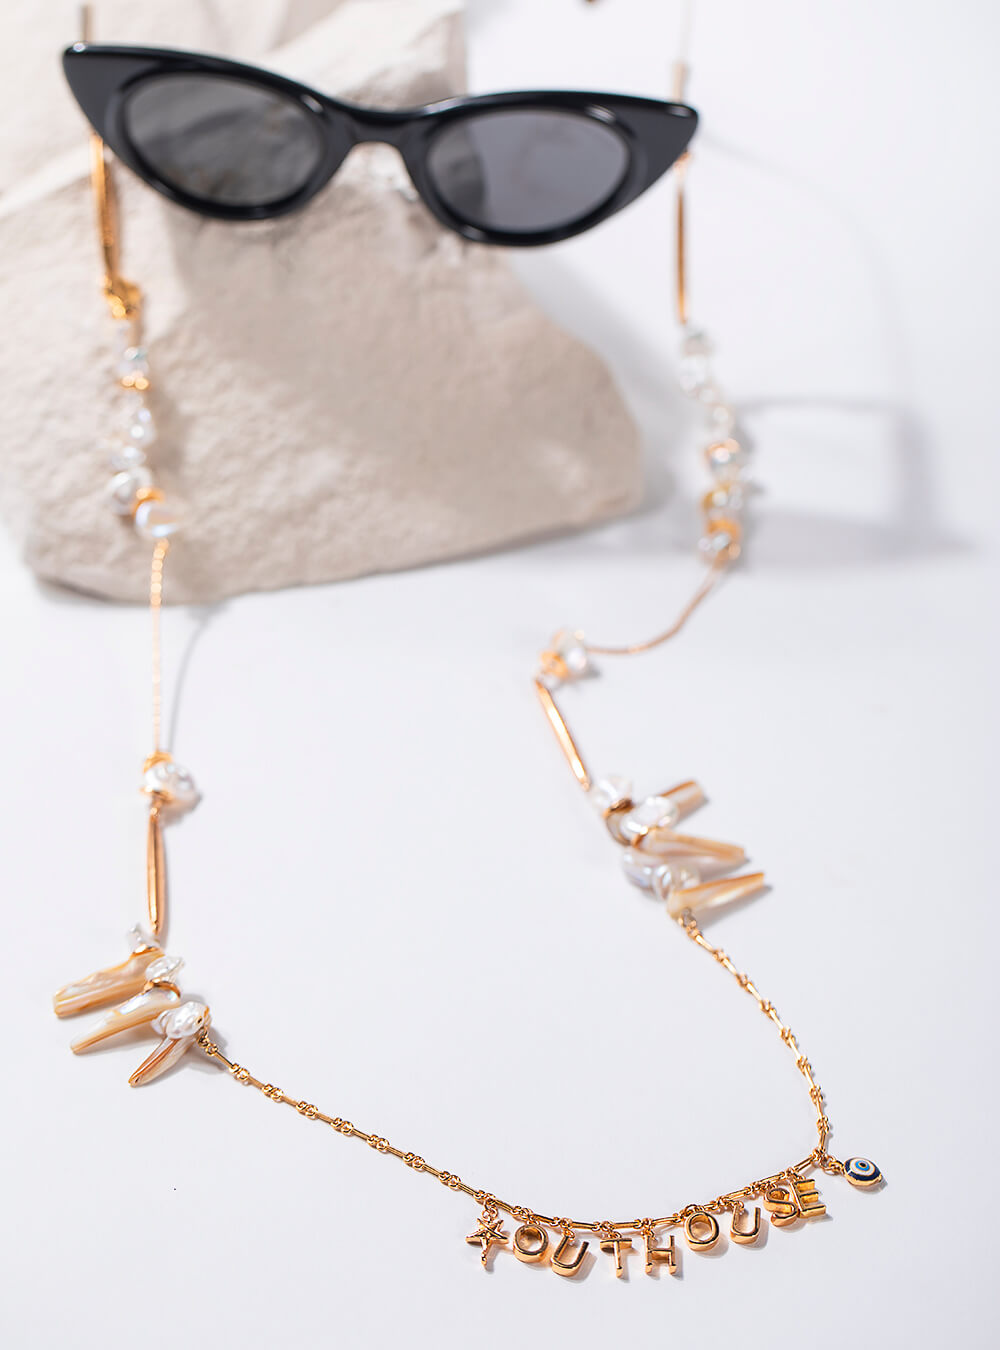 Buy 1PC Chic Womens Gold Silver Sunglasses Chains Reading Beaded Glasses Chain  Eyewear Cord Lanyard Necklace at Amazon.in